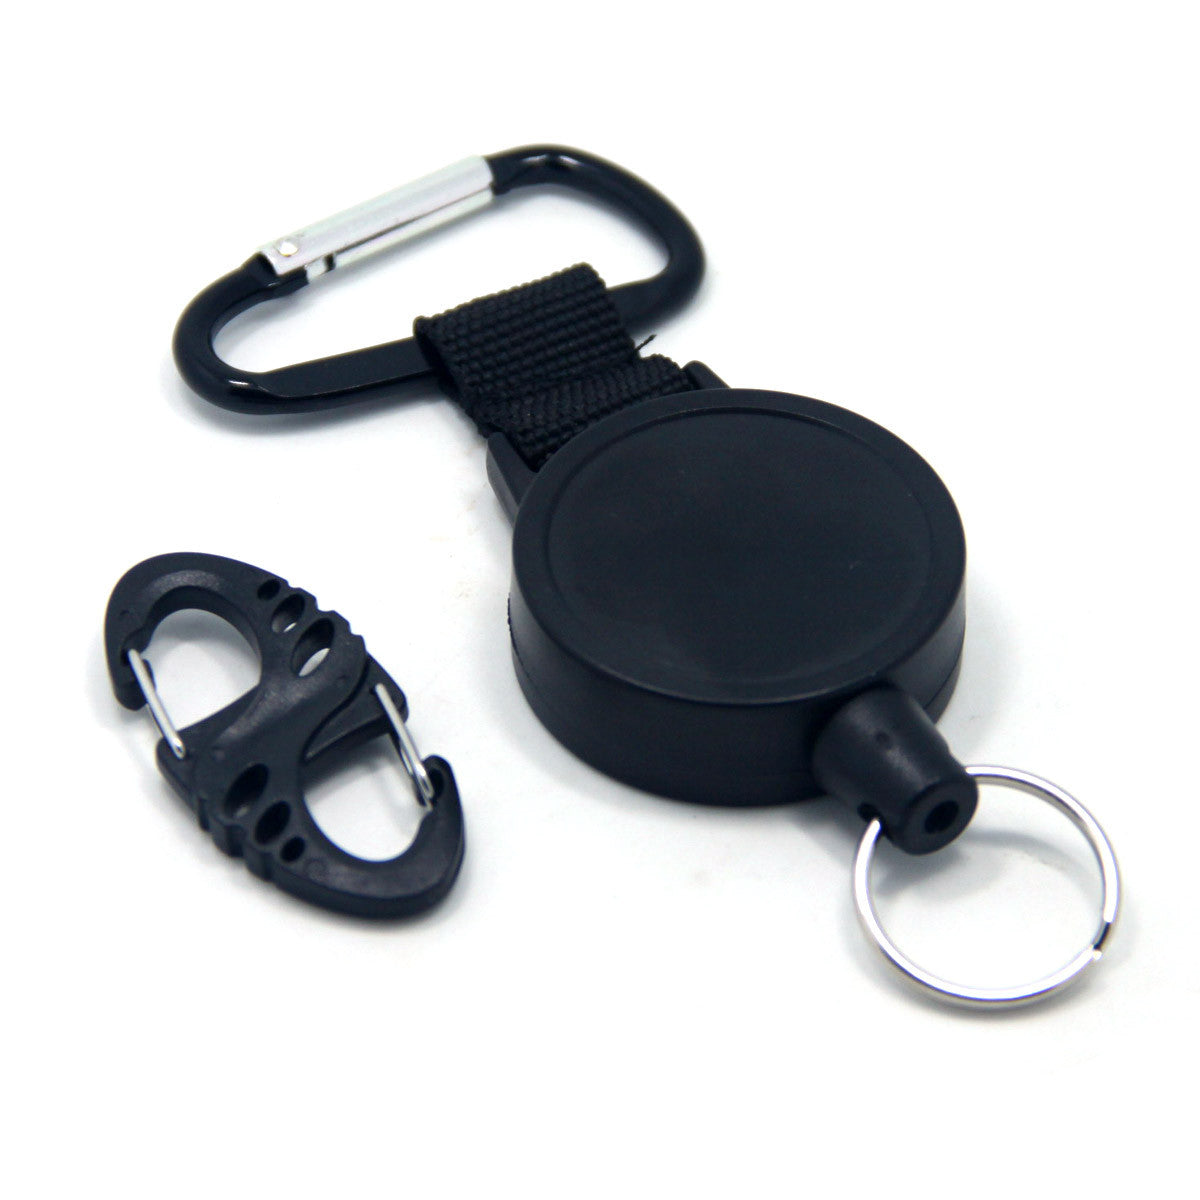 Heavy Duty Fly FIshing Zinger Securit Retractable Reel w/ Polycarbonate  Case 24 inch Steel Cable